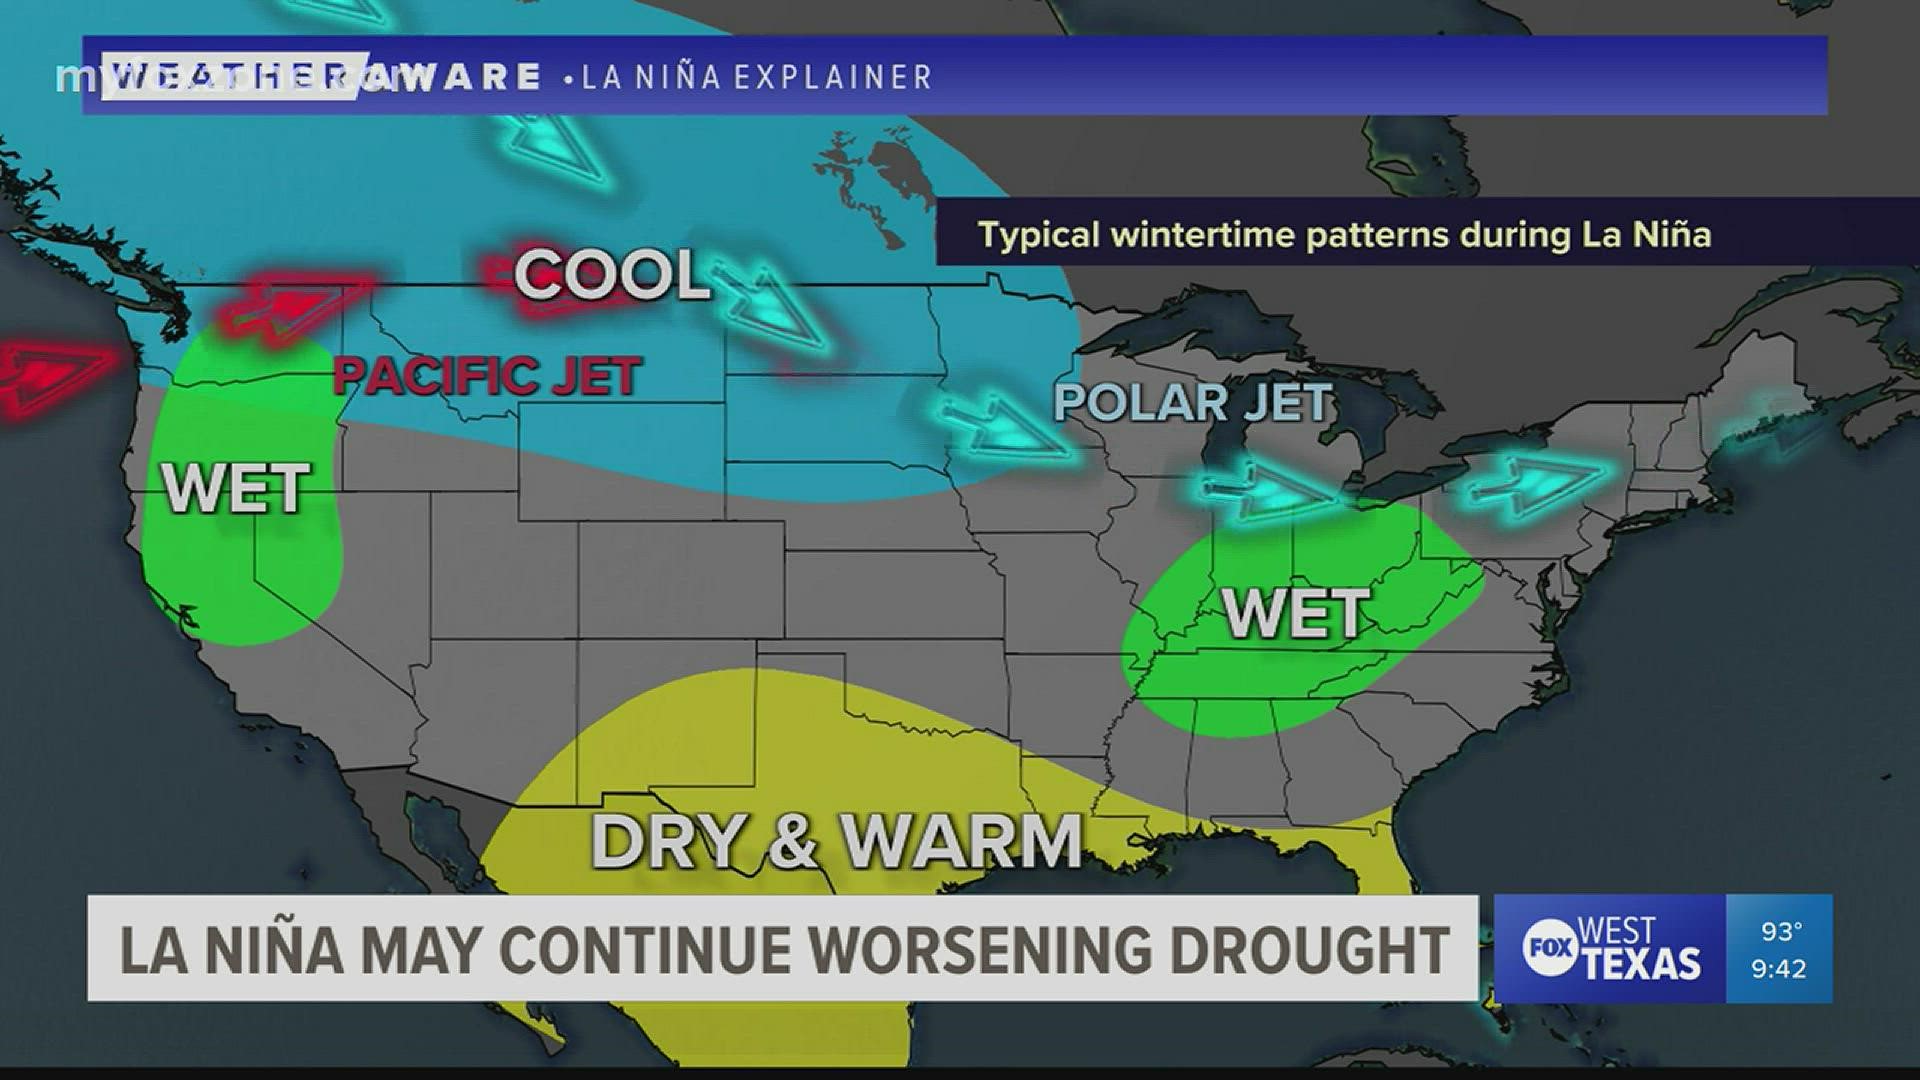 La Niña may extend to the end of year and worsen drought conditions in Texas